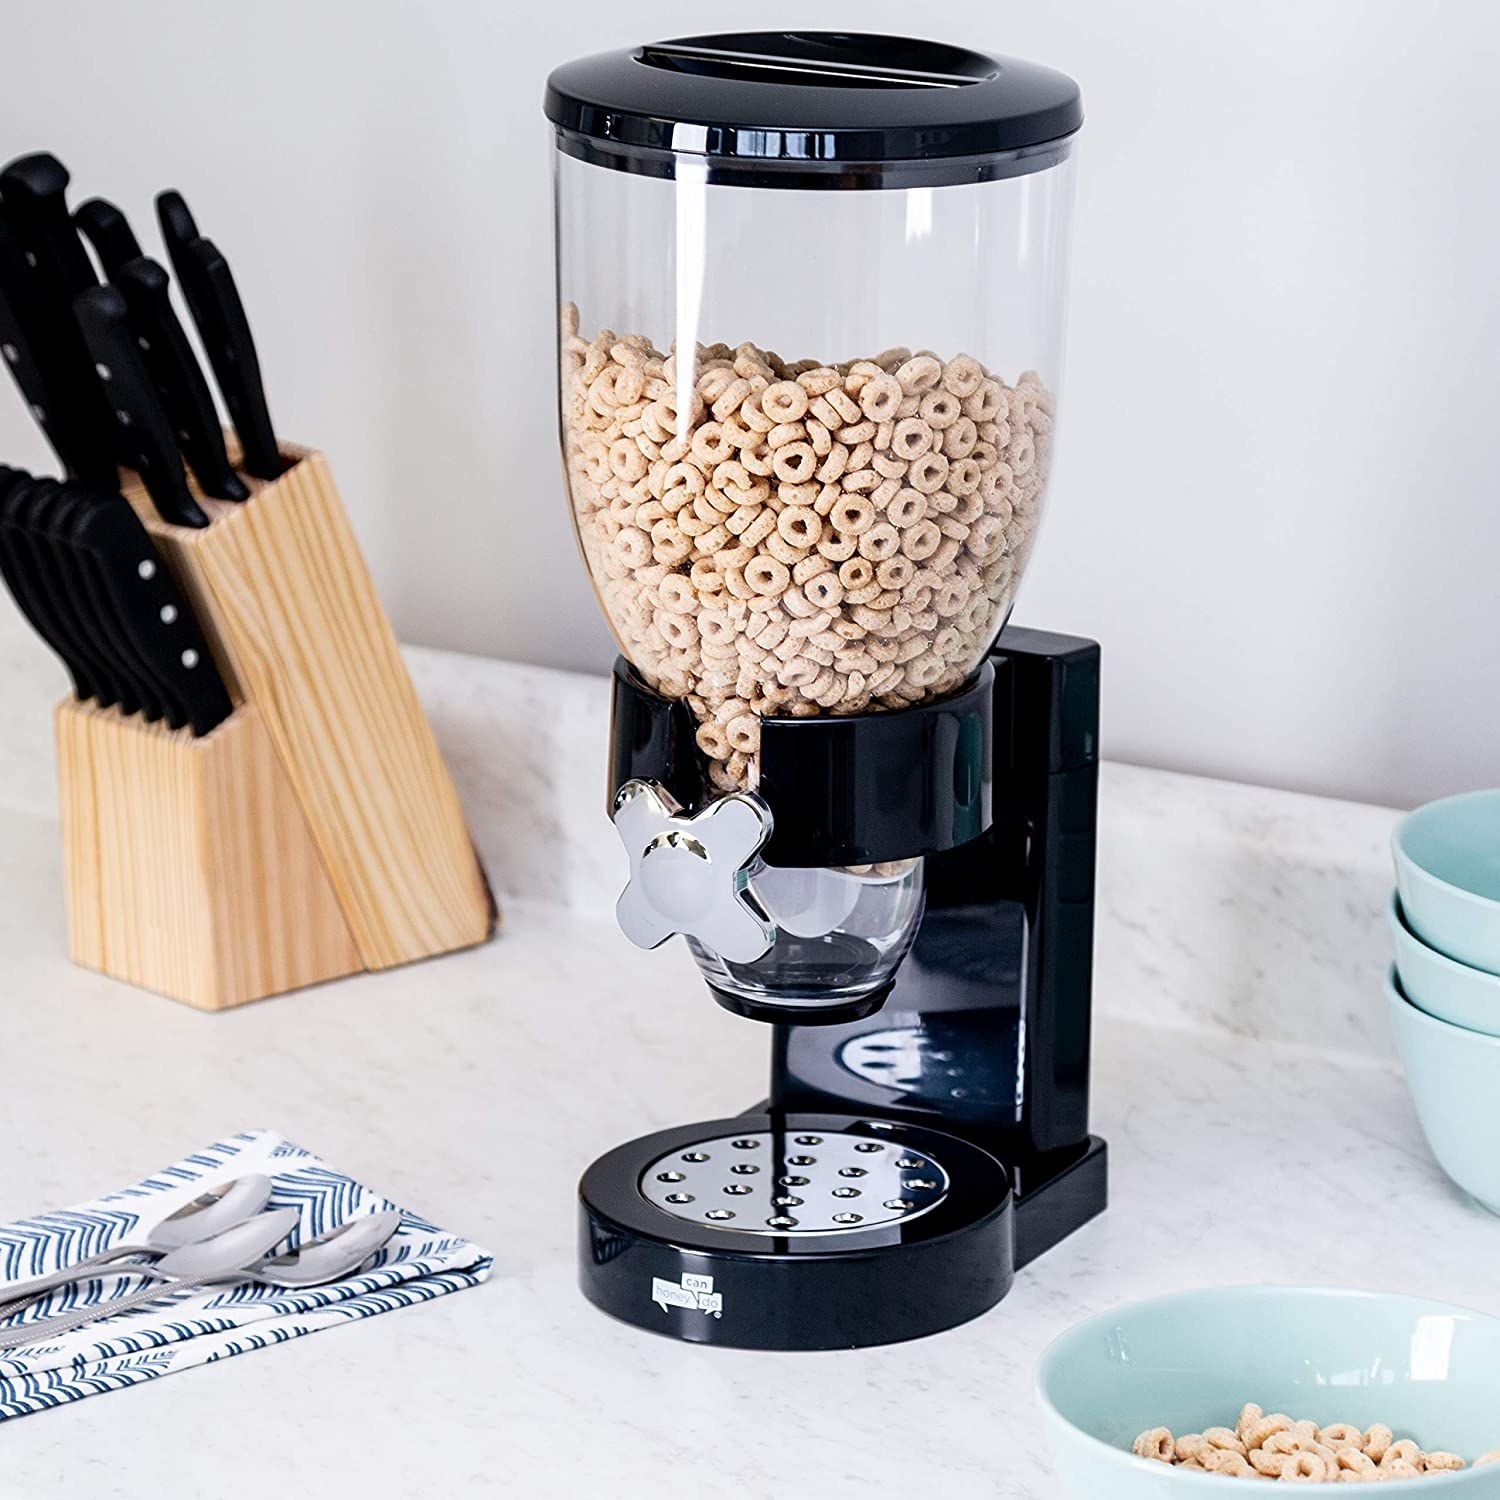 The cereal dispenser on a counter filled with Cheerios